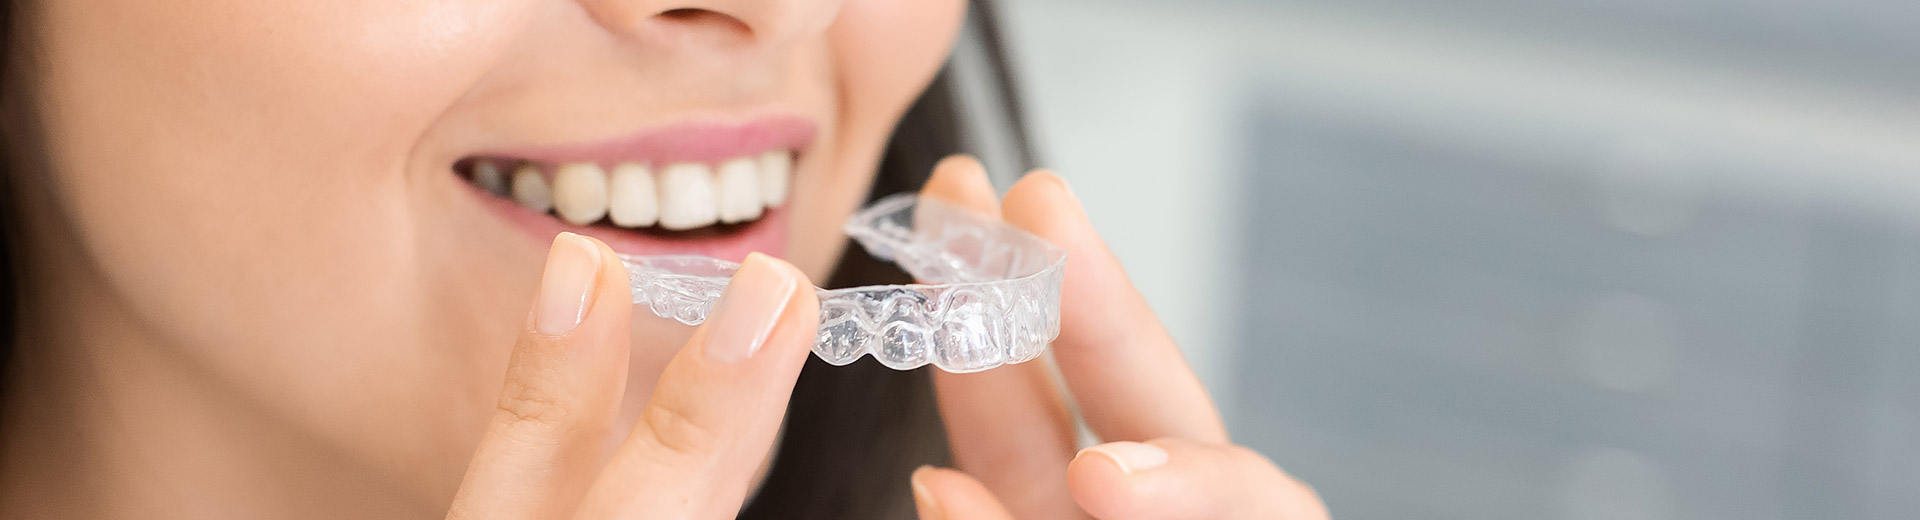 A woman is holding a Invisalign clear aligners.